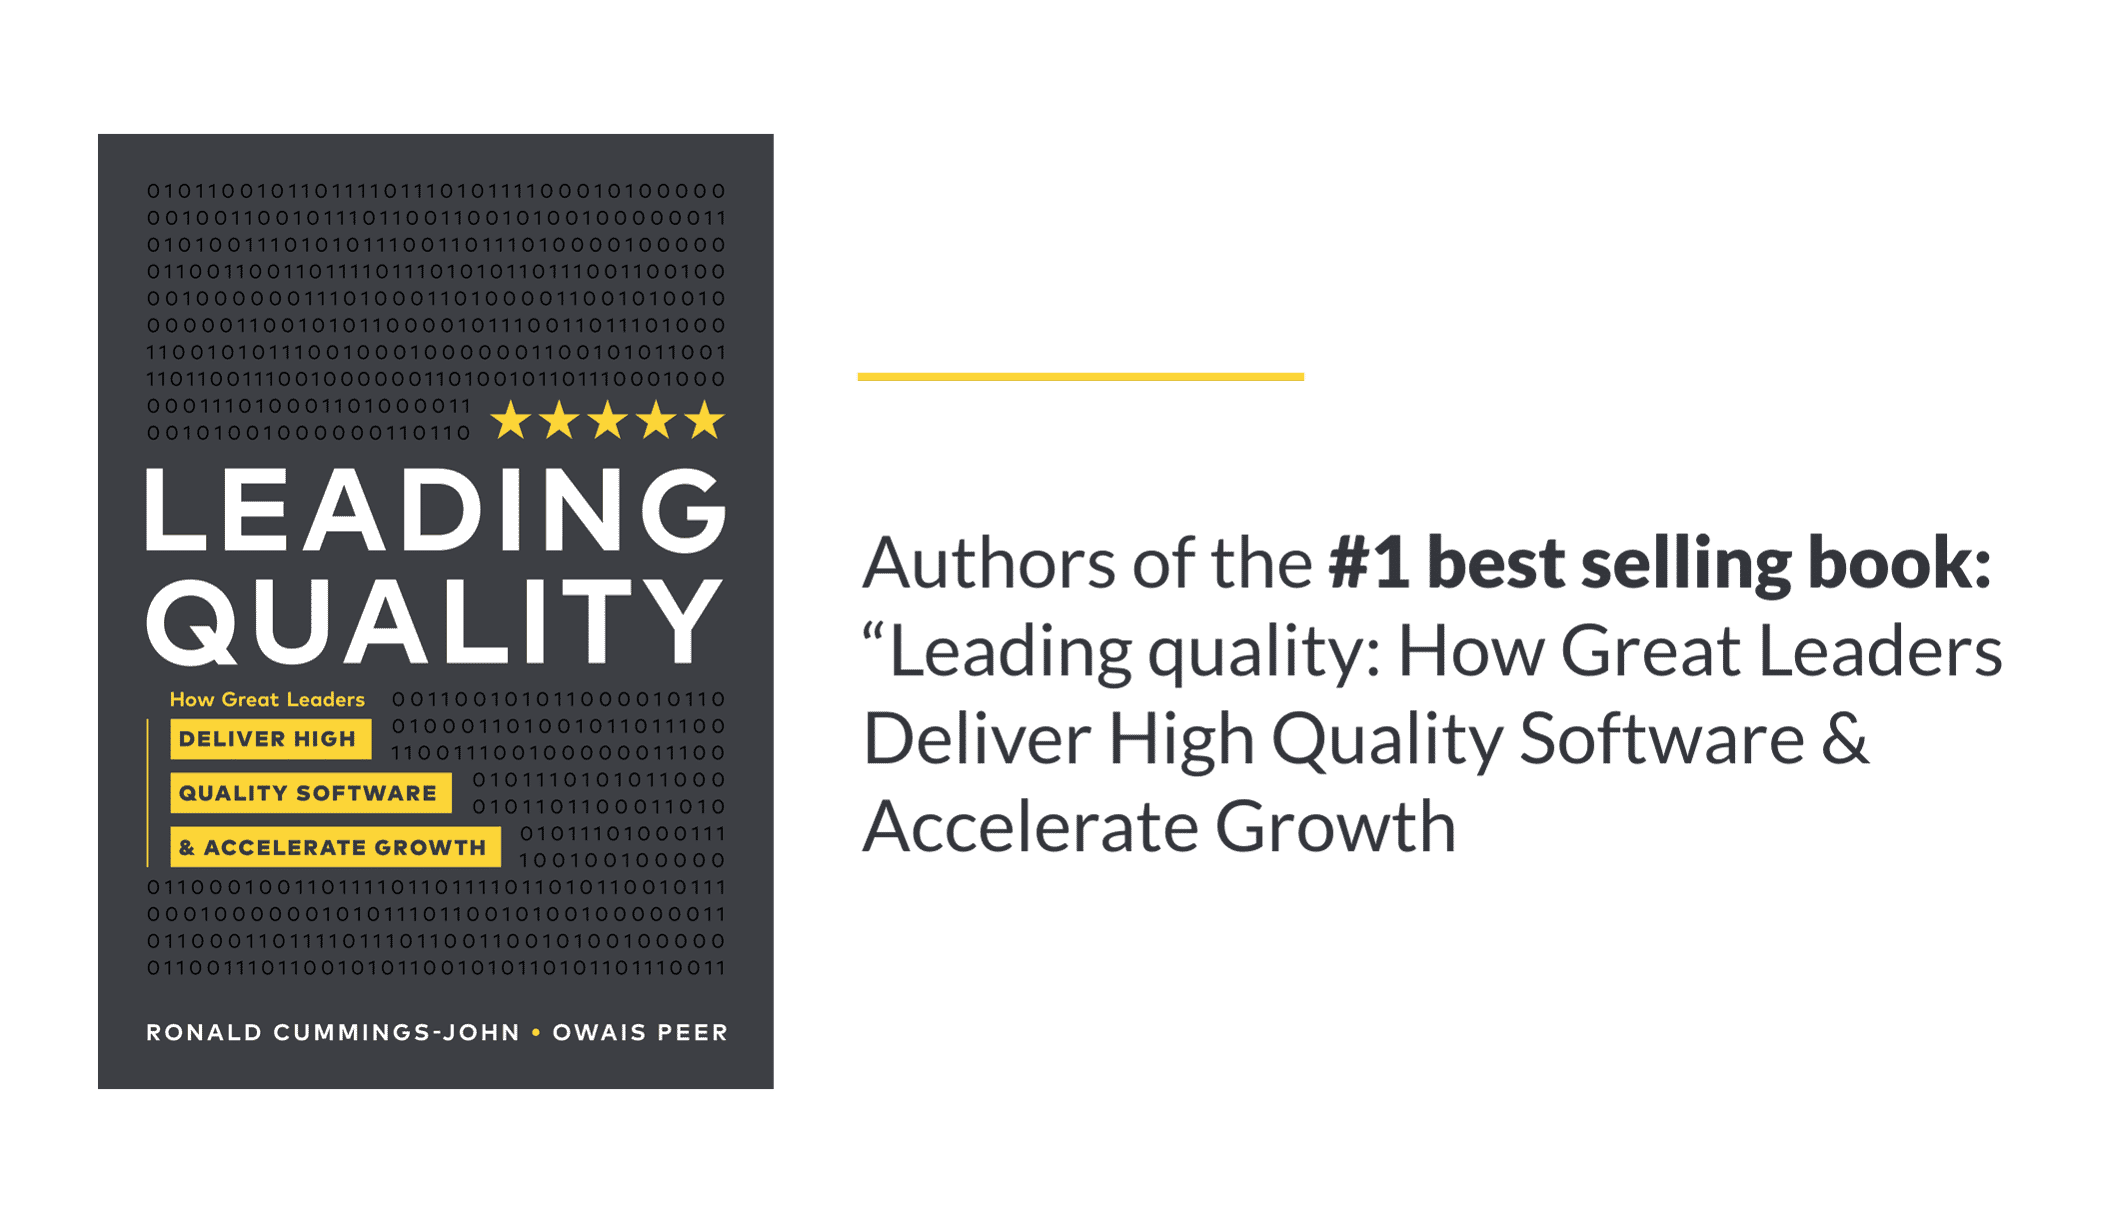 image-leading-quality-book-quote@2x